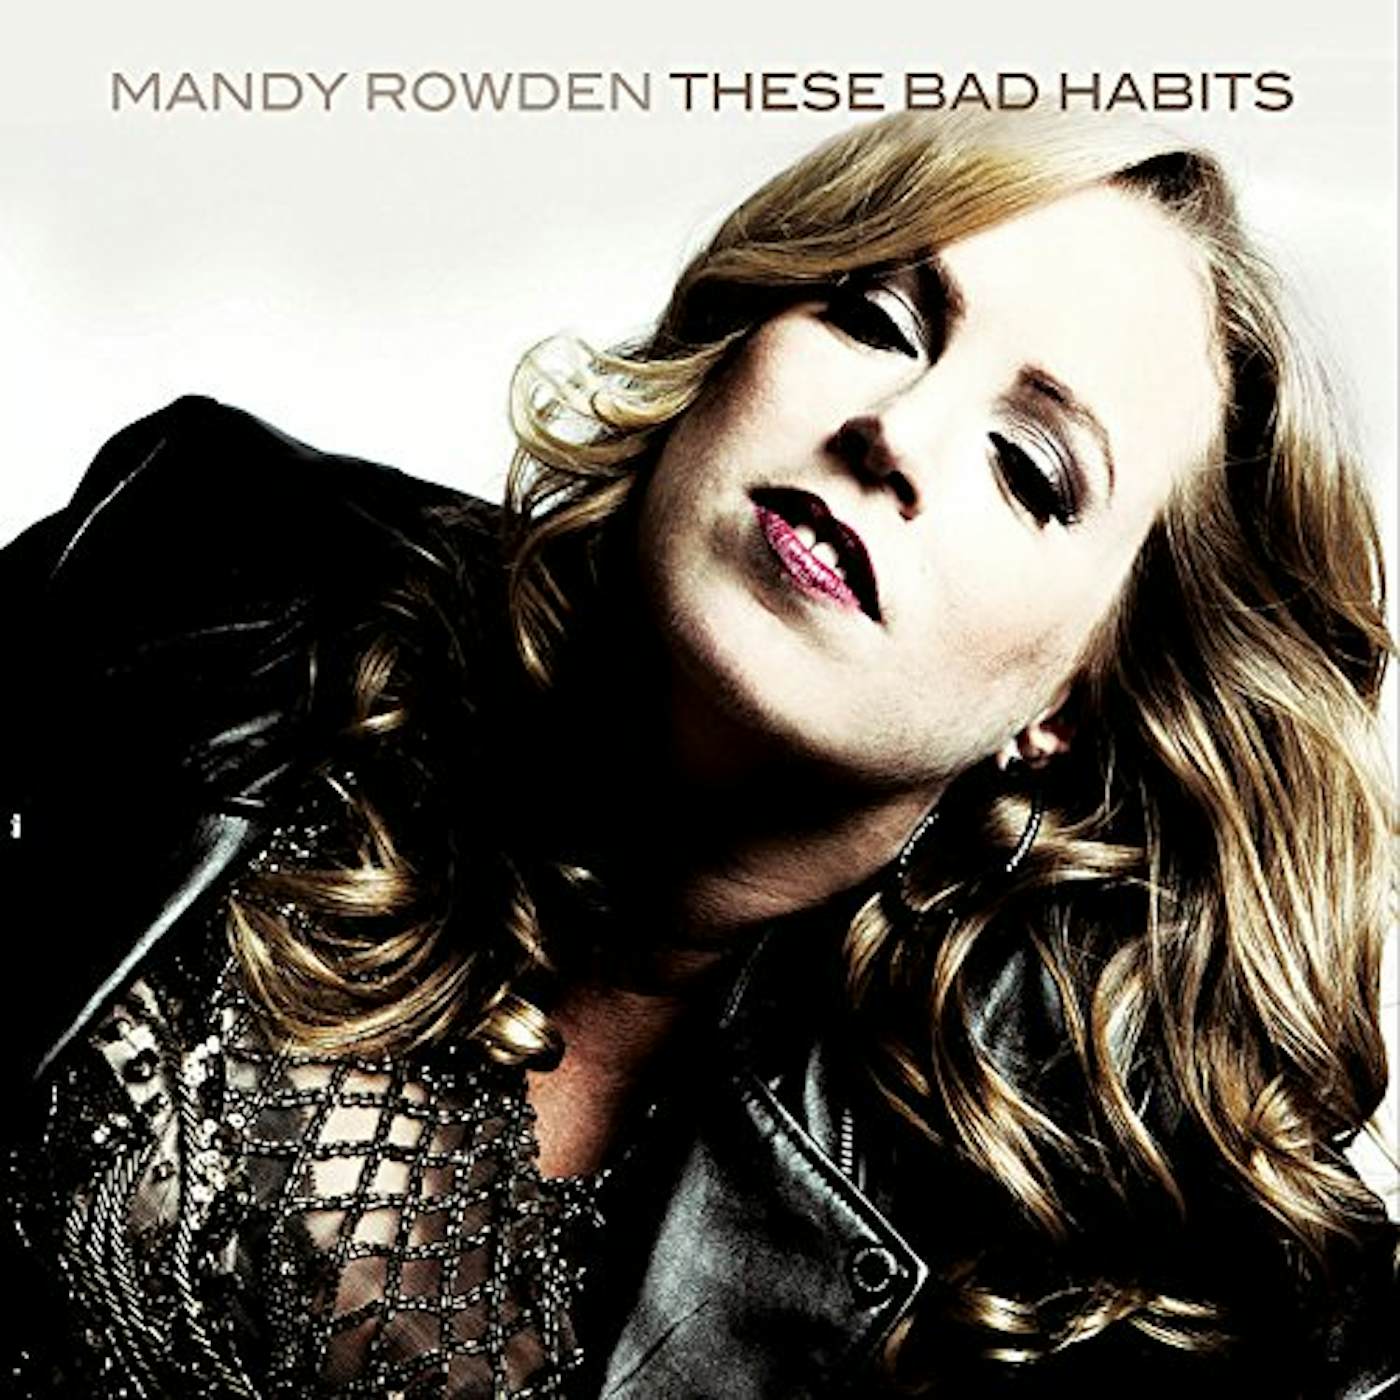 Mandy Rowden THESE BAD HABITS CD